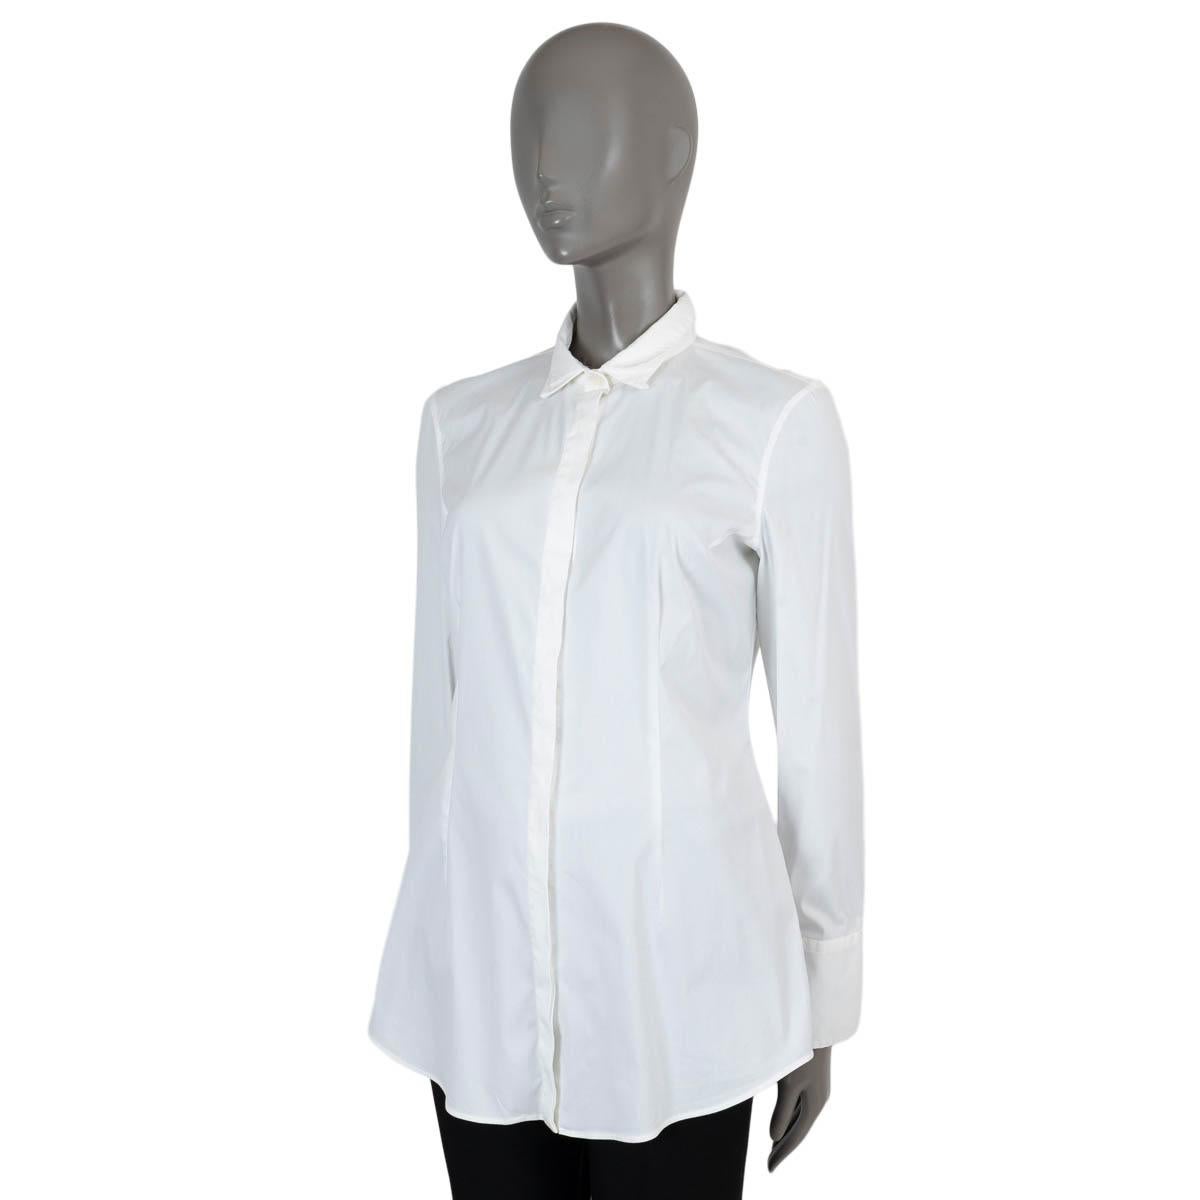 100% authentic Brunello Cucinelli poplin button-up shirt in white cotton (72%), polyamide (23%) and elastane (5%). Features a double layered collar. Closes with concealed buttons down the front. Has been worn and is in excellent condition.